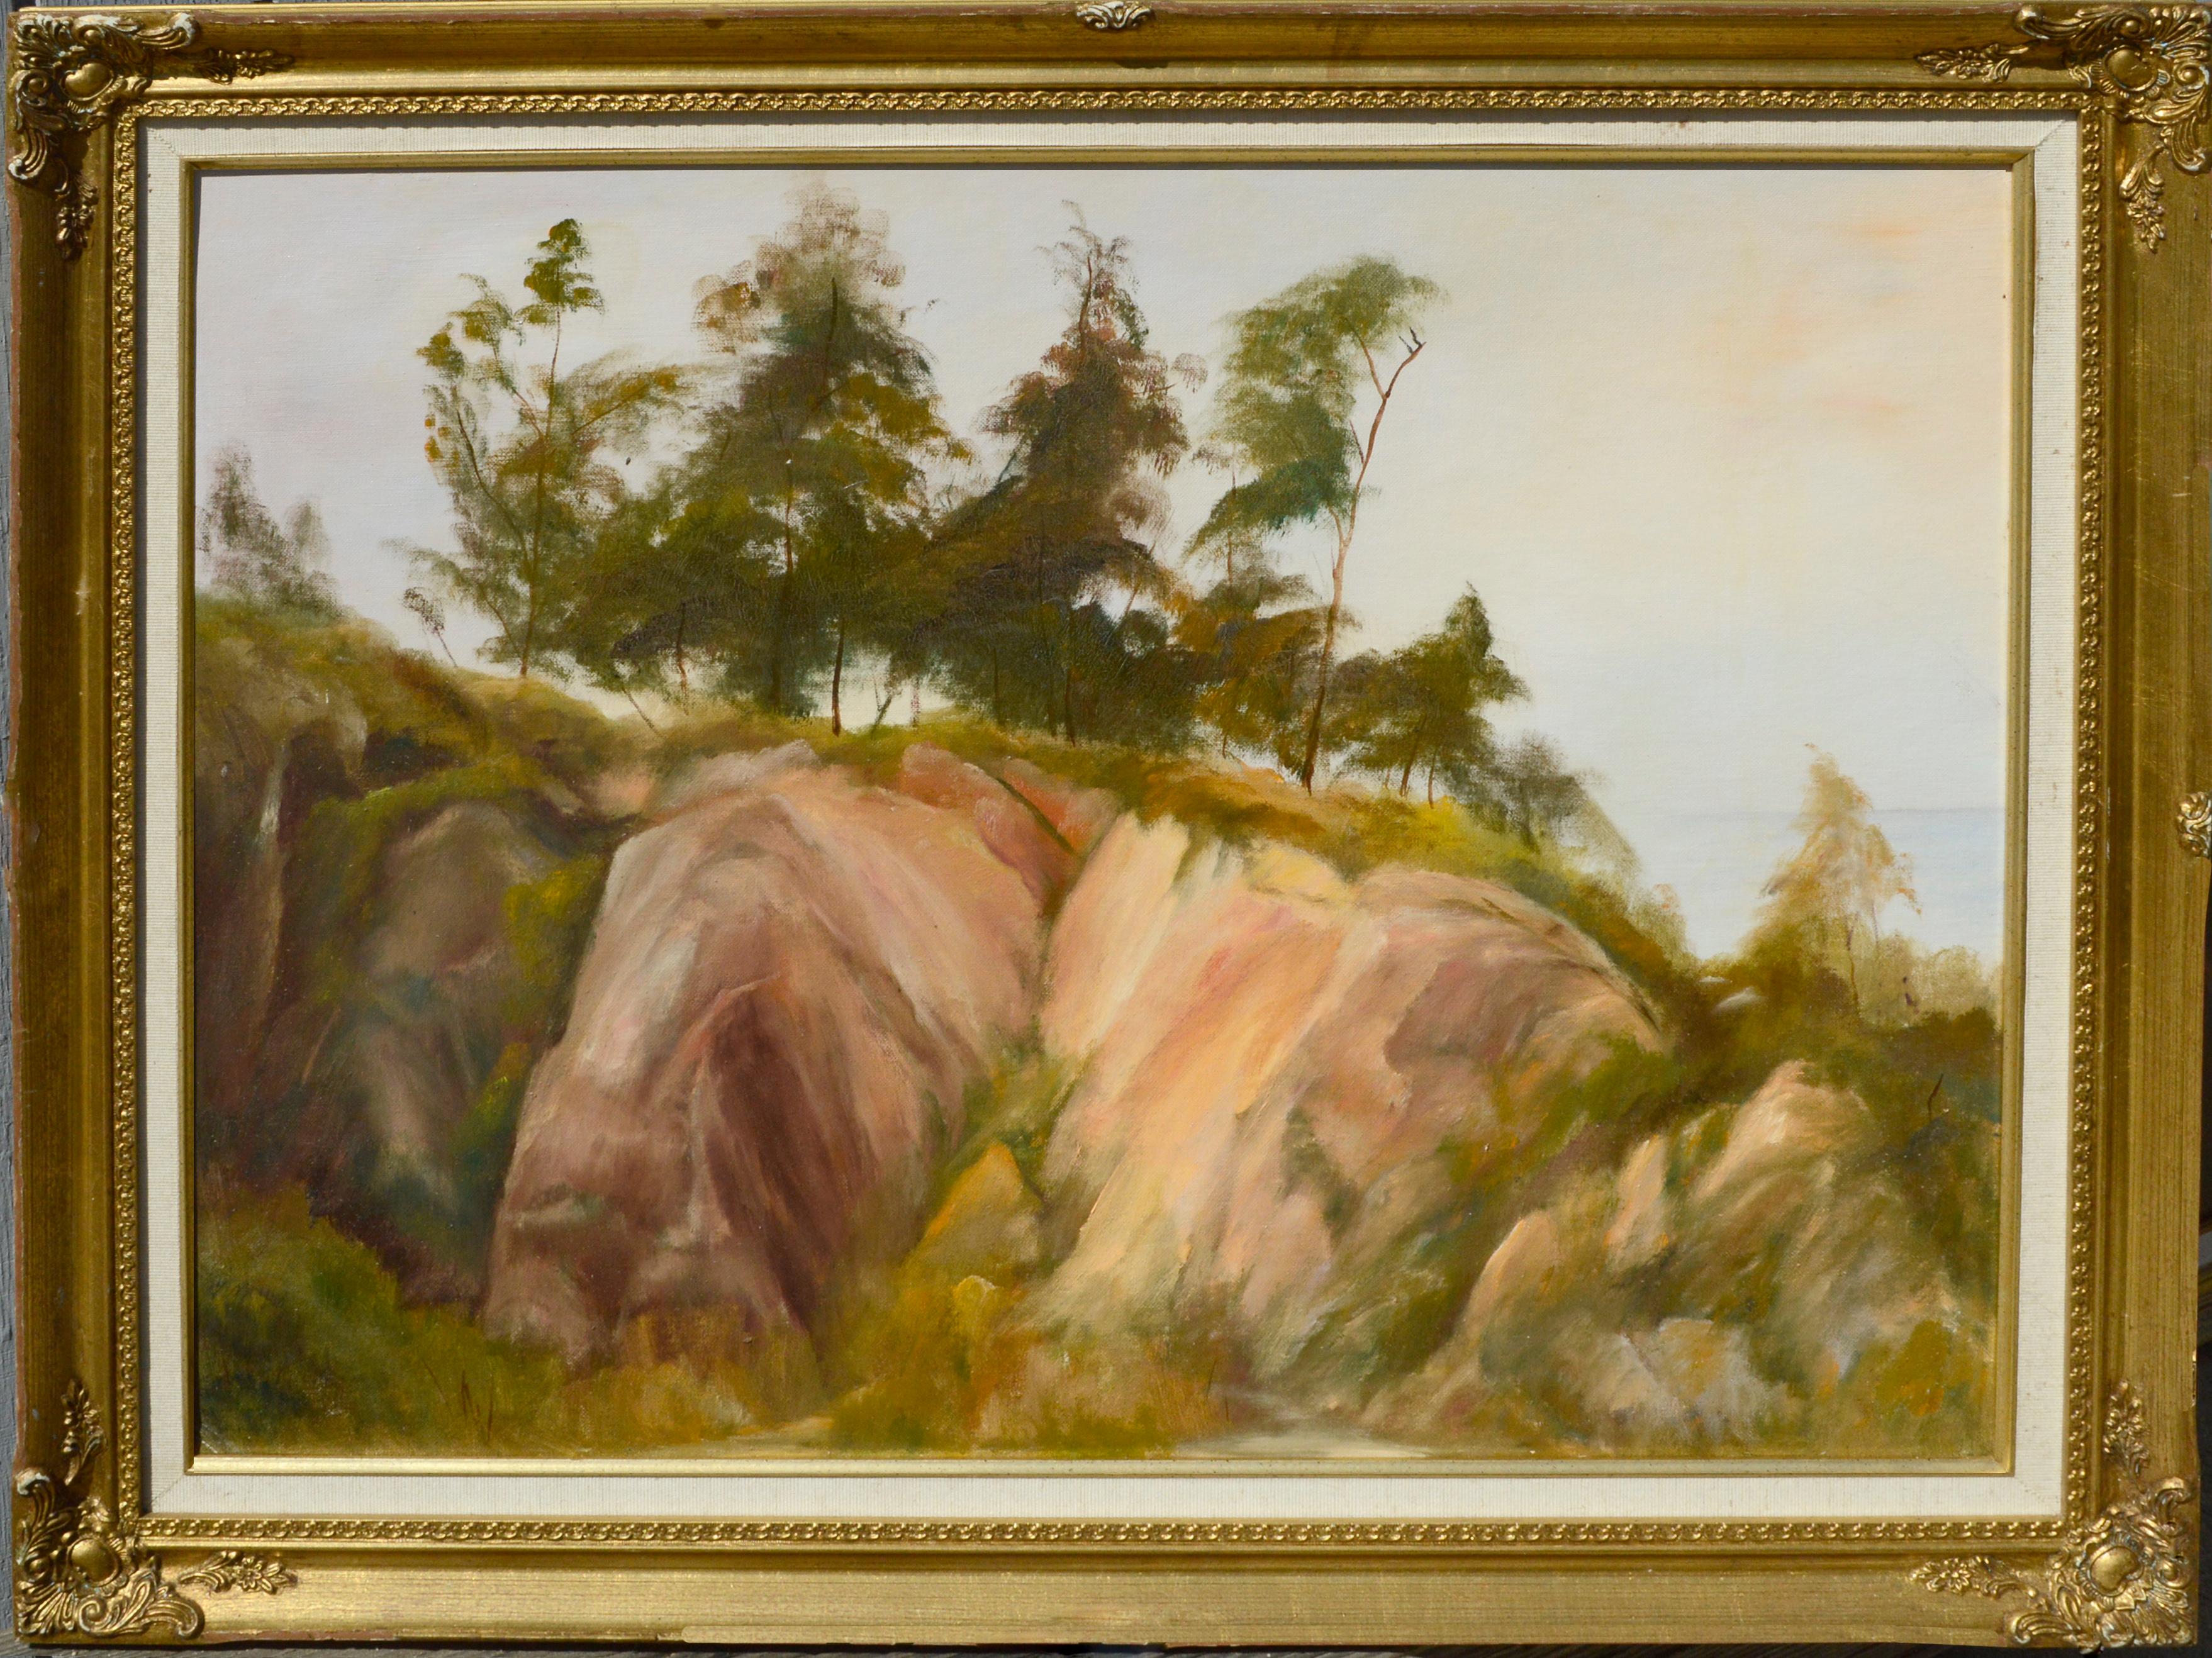 Kenneth Lucas Landscape Painting - Trees at the Top of the Big Sur Coastal Bluffs Landscape - Oil on Artists Board 